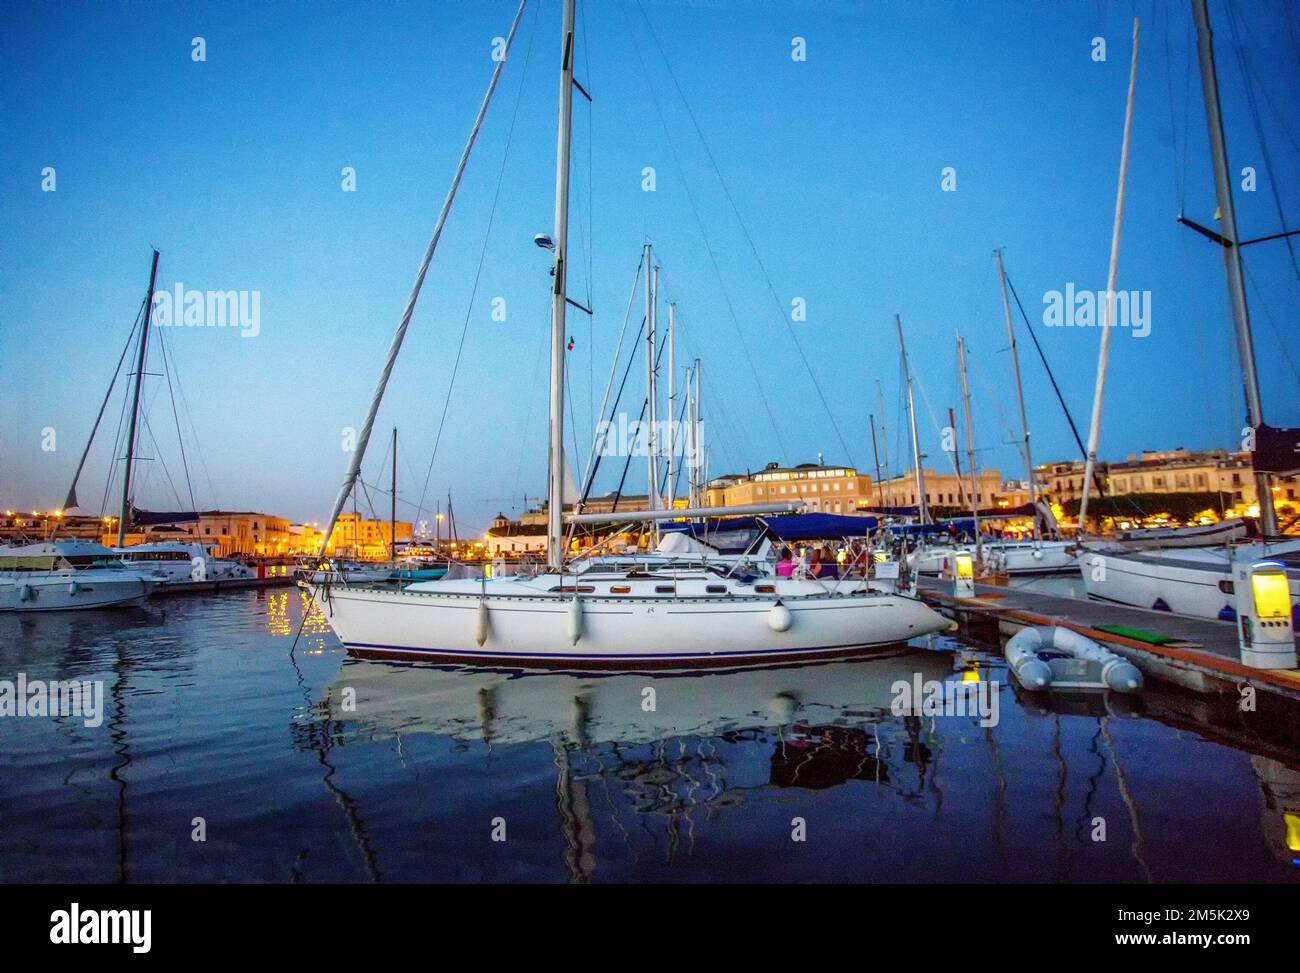 Sailboats in harbor of Siracuse (behind Old town as island).   On second boat - Italian people  in distance (unrecognizable persons)  celebrate weeken Stock Photo